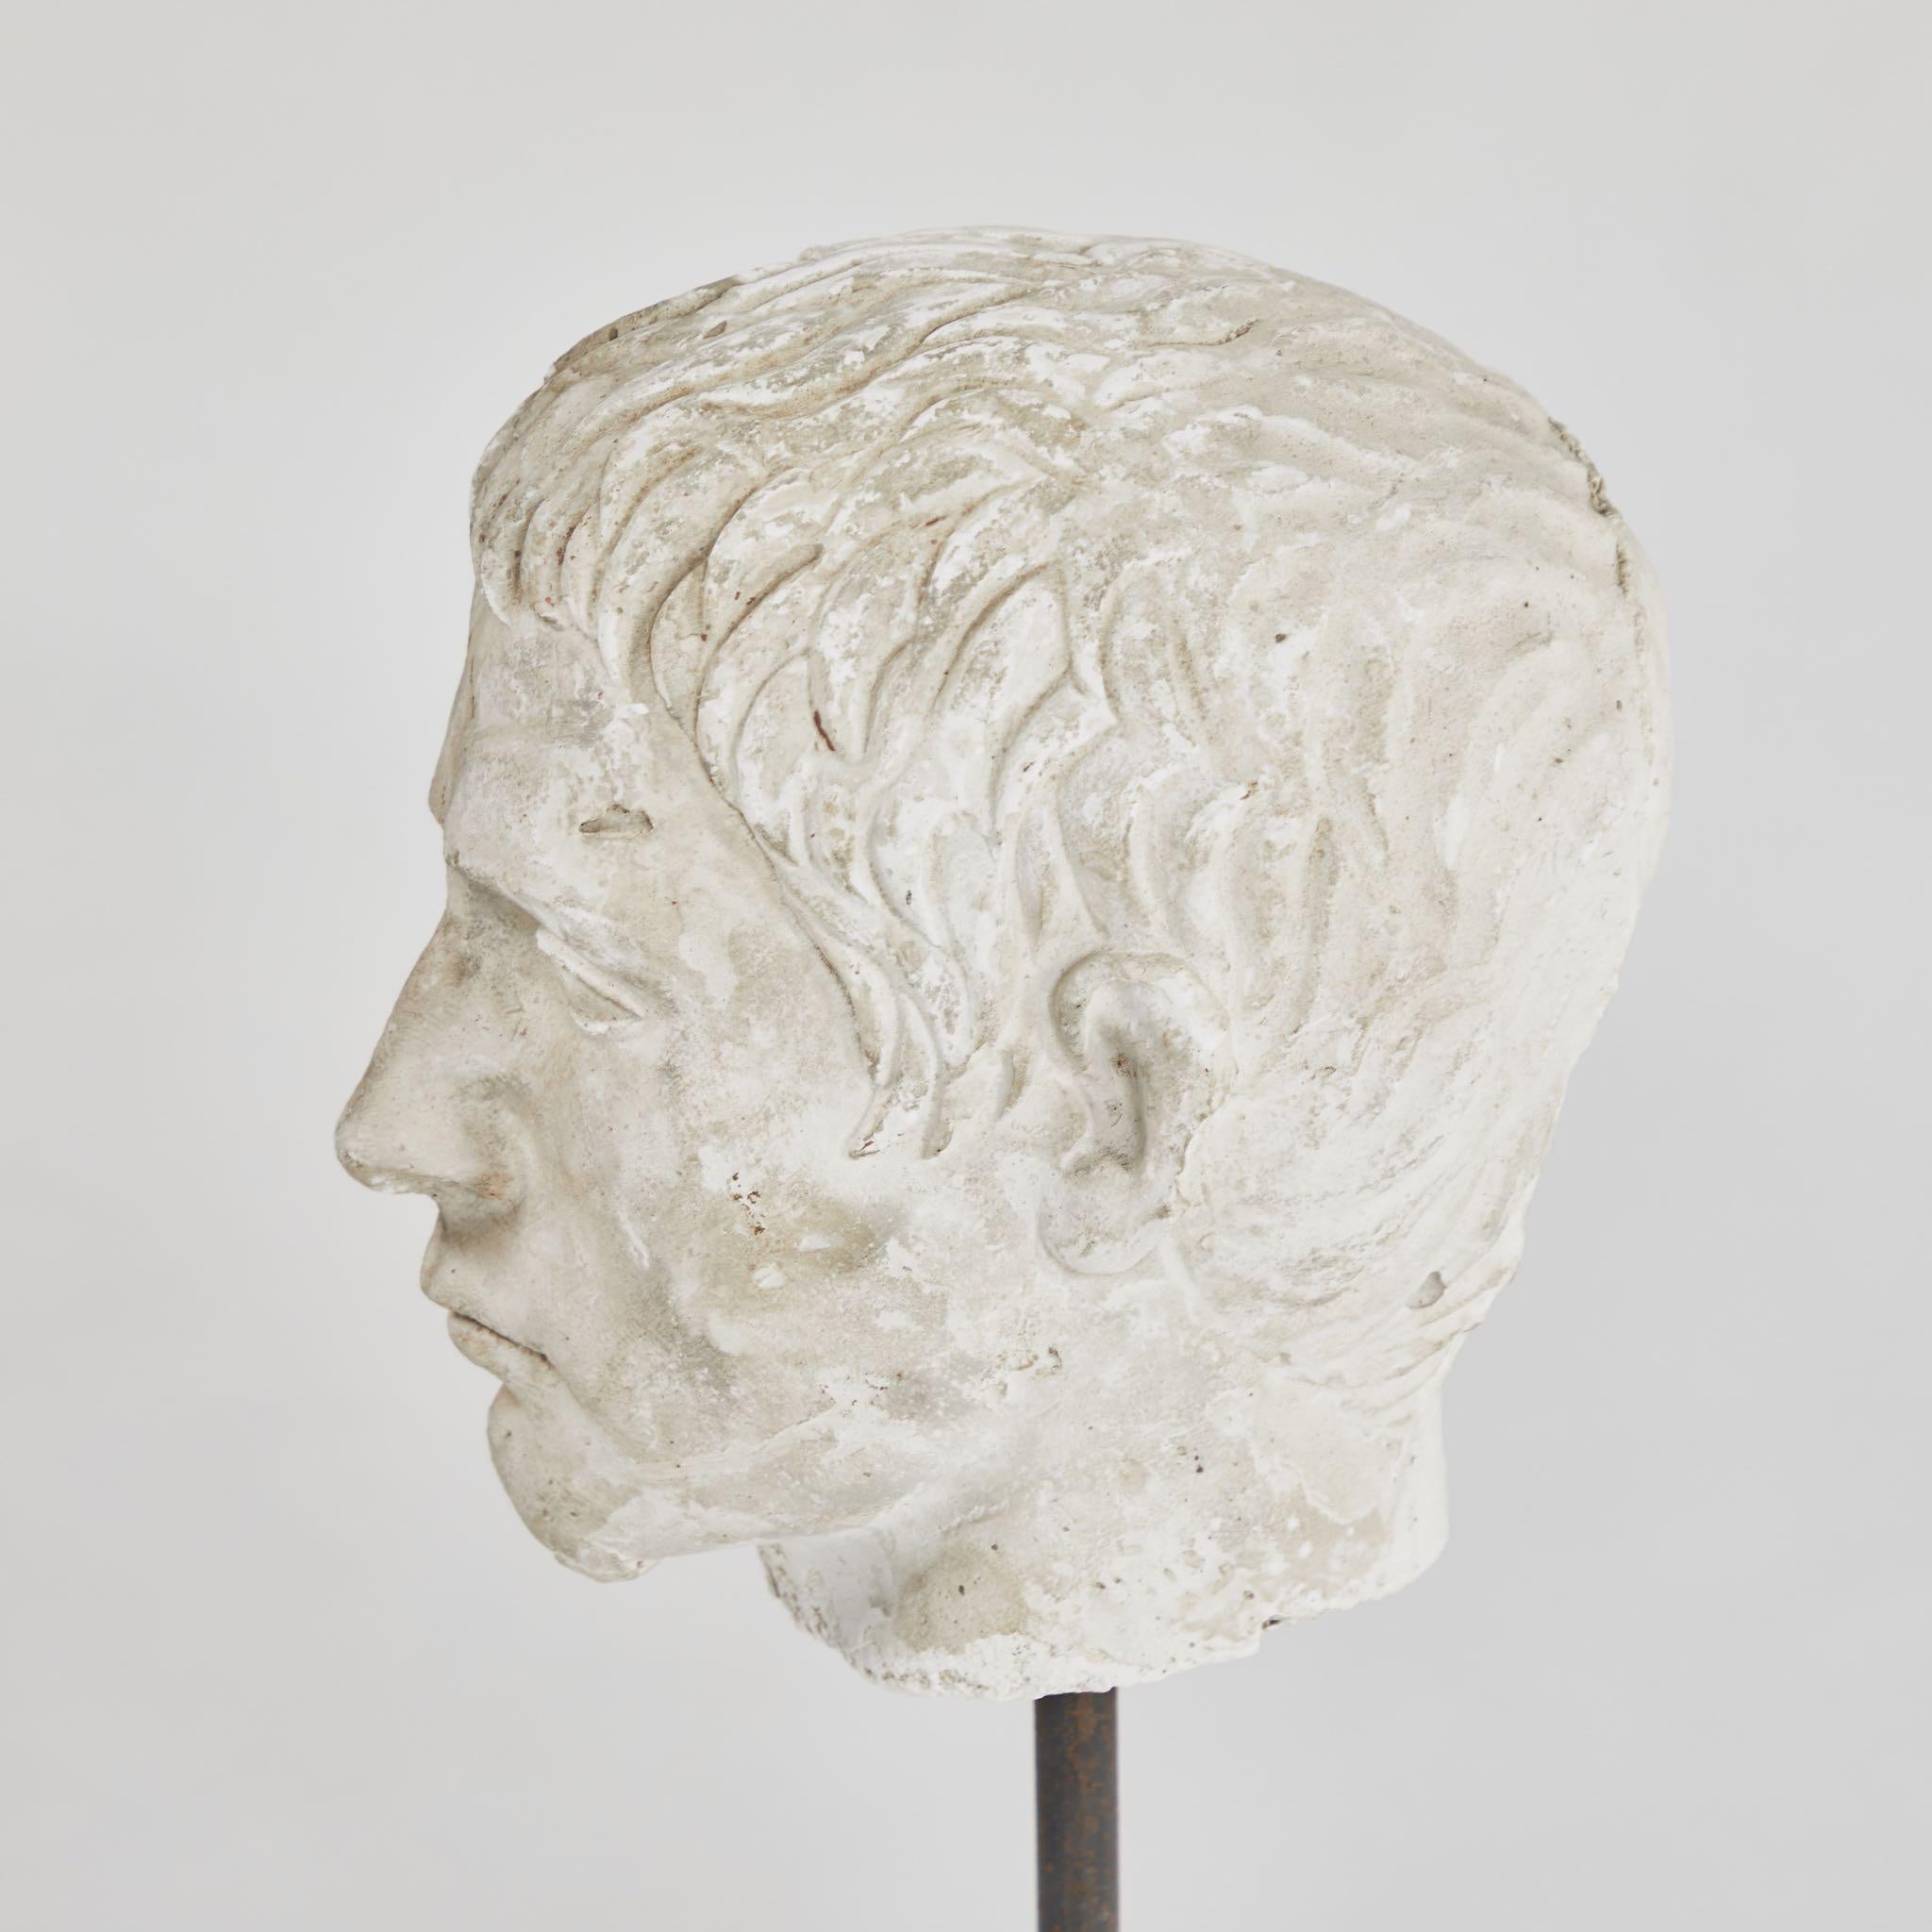 A carved bust on stand in plaster, originating in England, circa 1880.